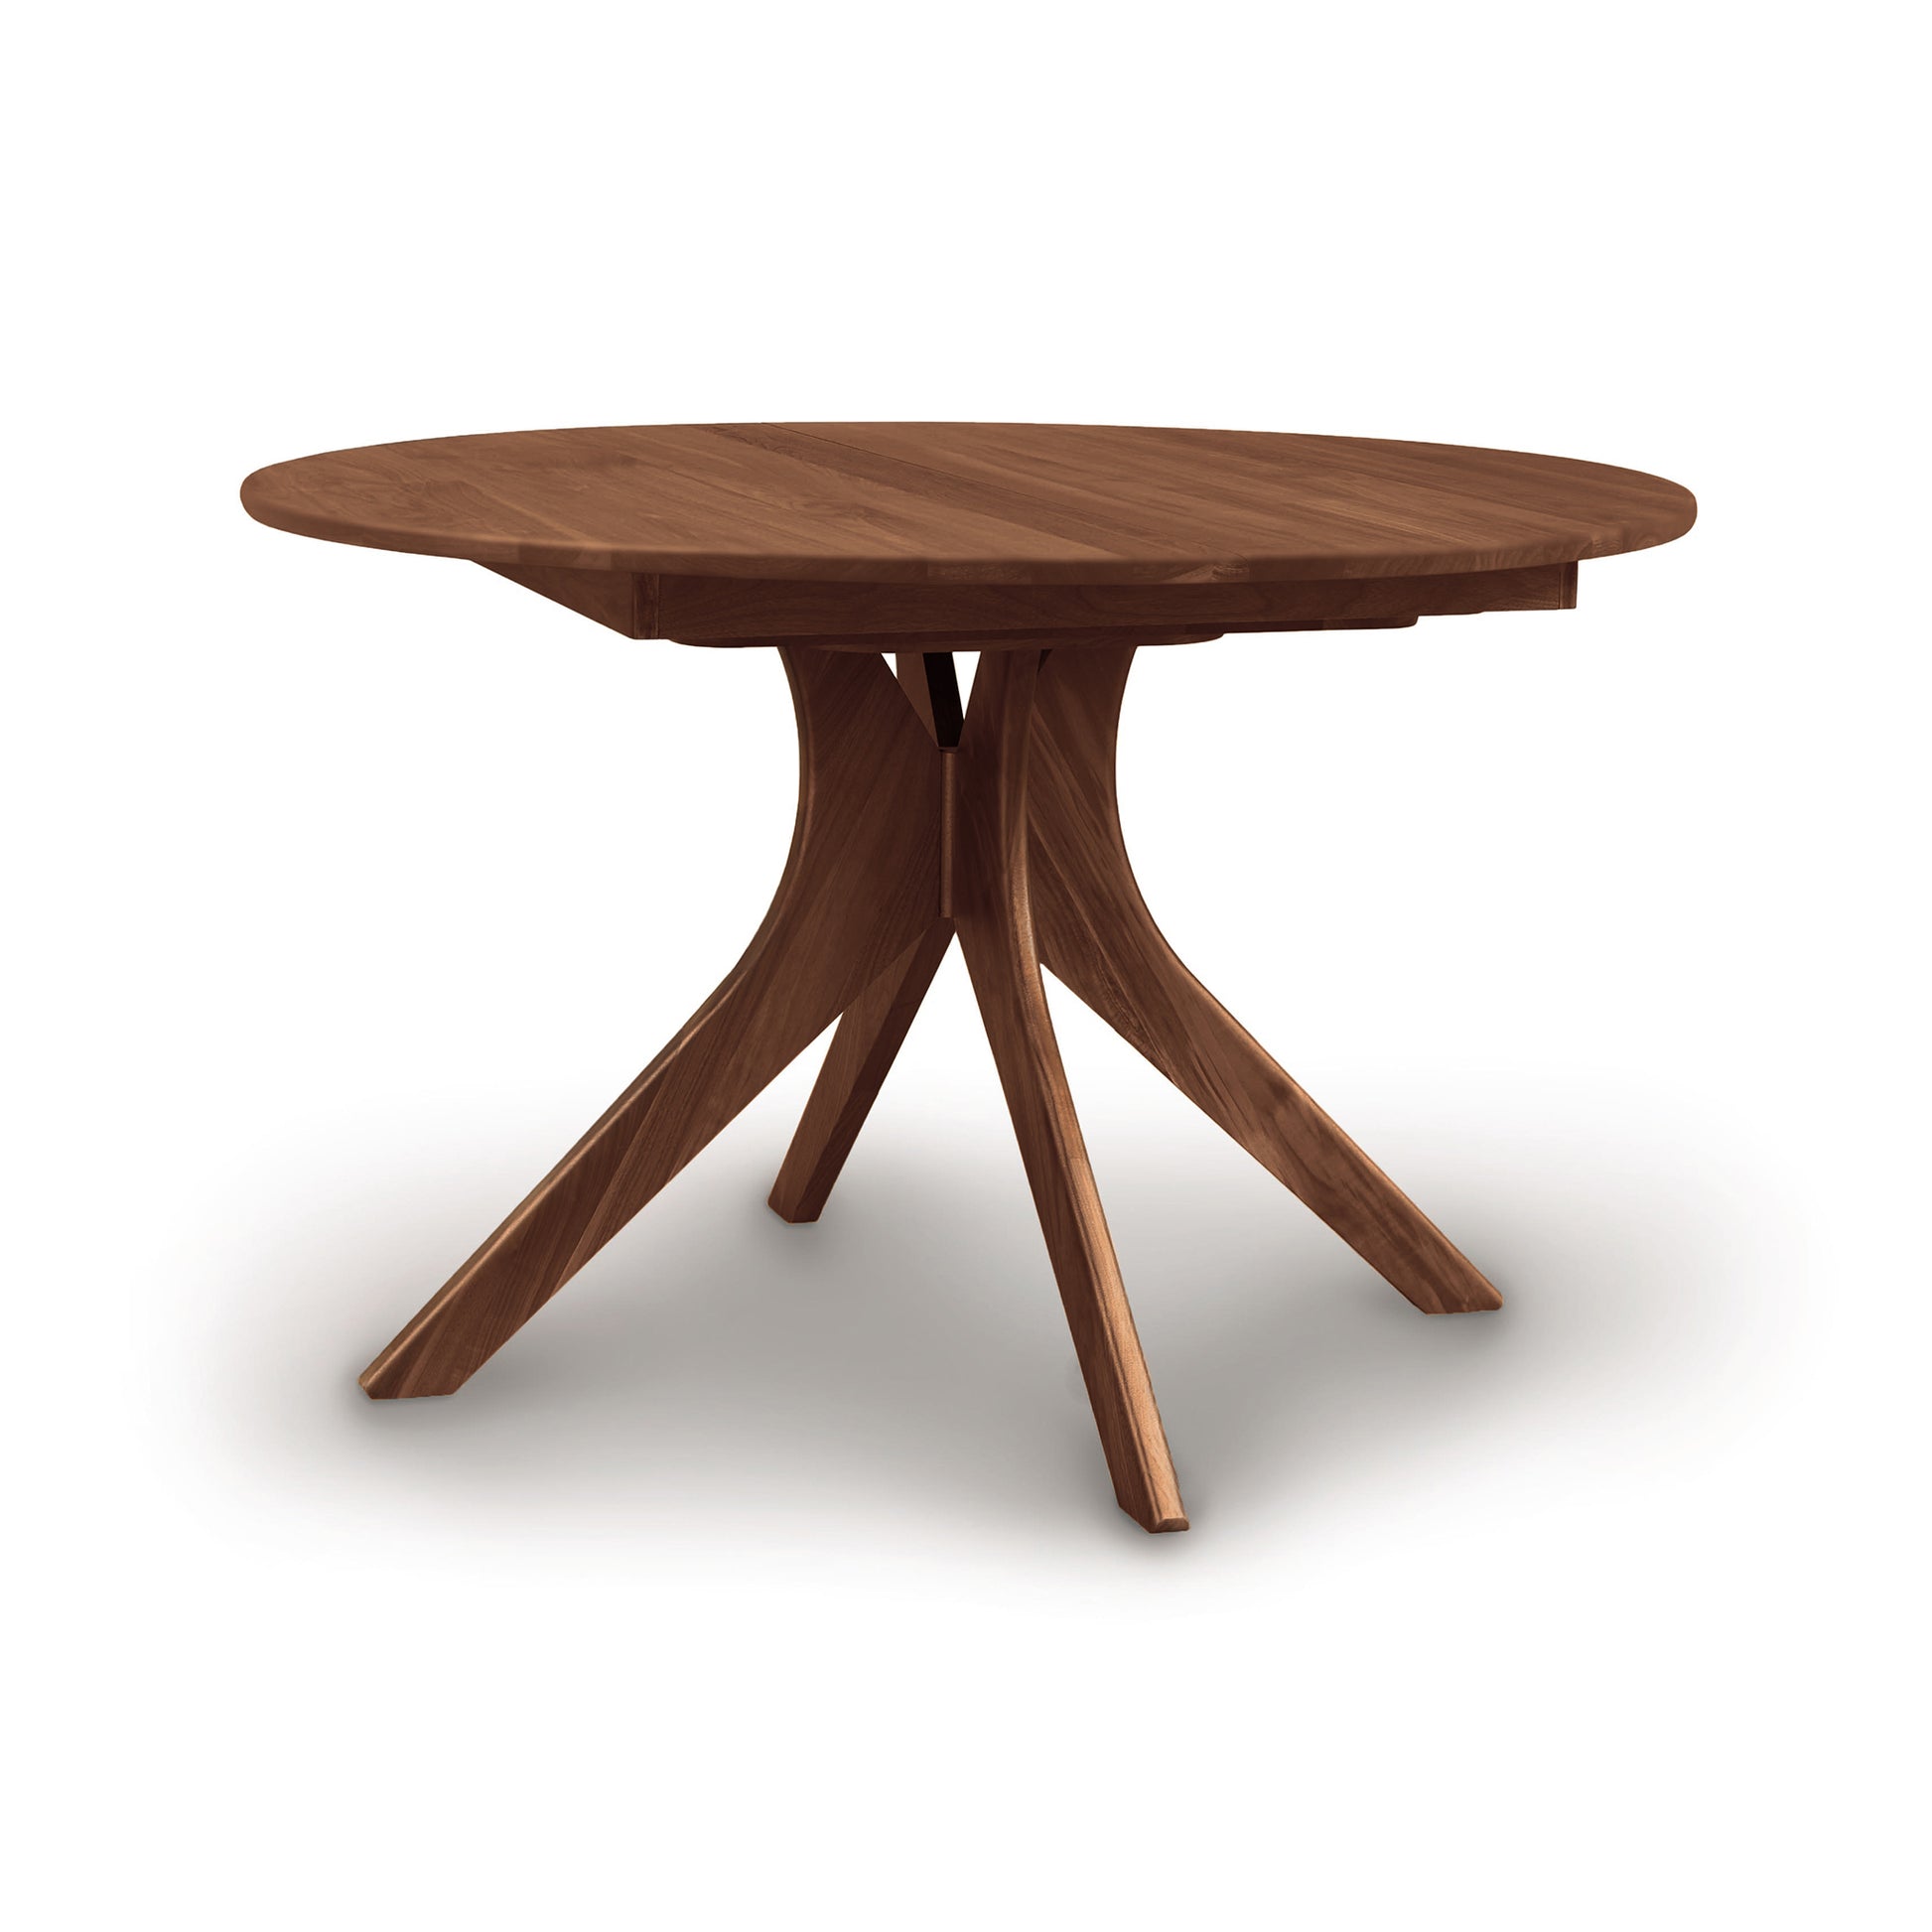 An Audrey Round Extension Dining Table, made of walnut, with three legs on a white background.